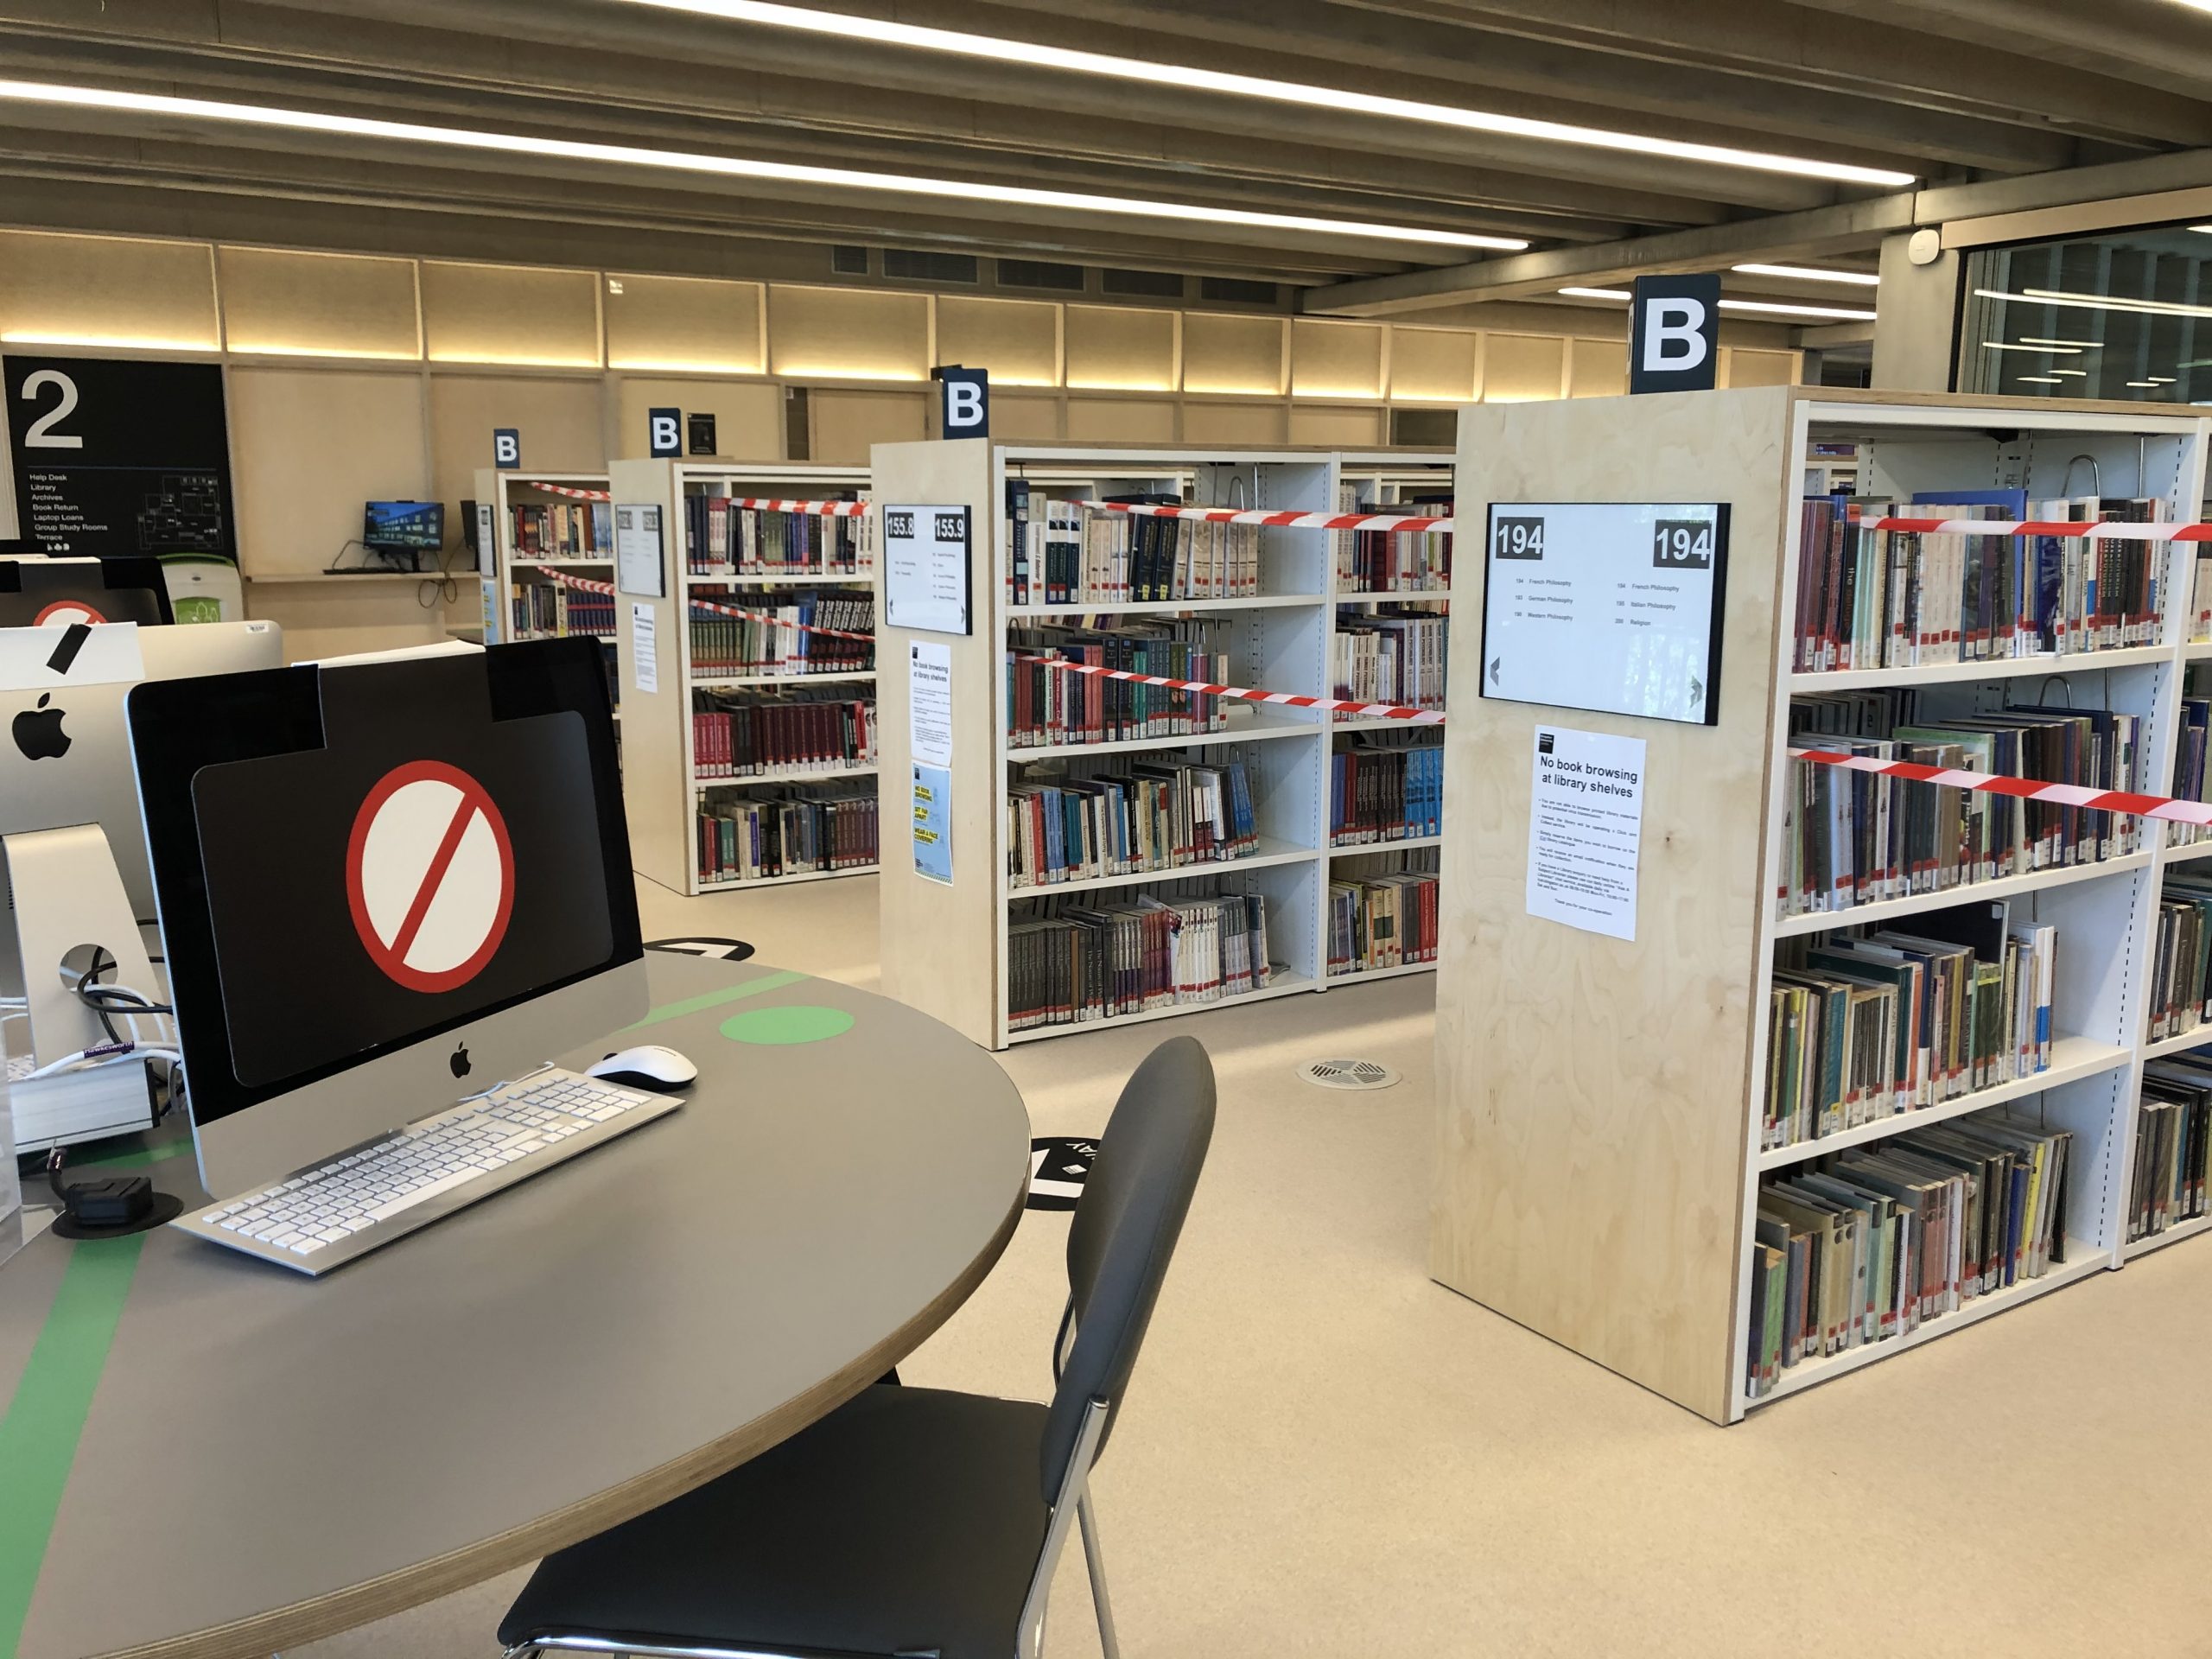 Library limits: How are students finding the current rules?